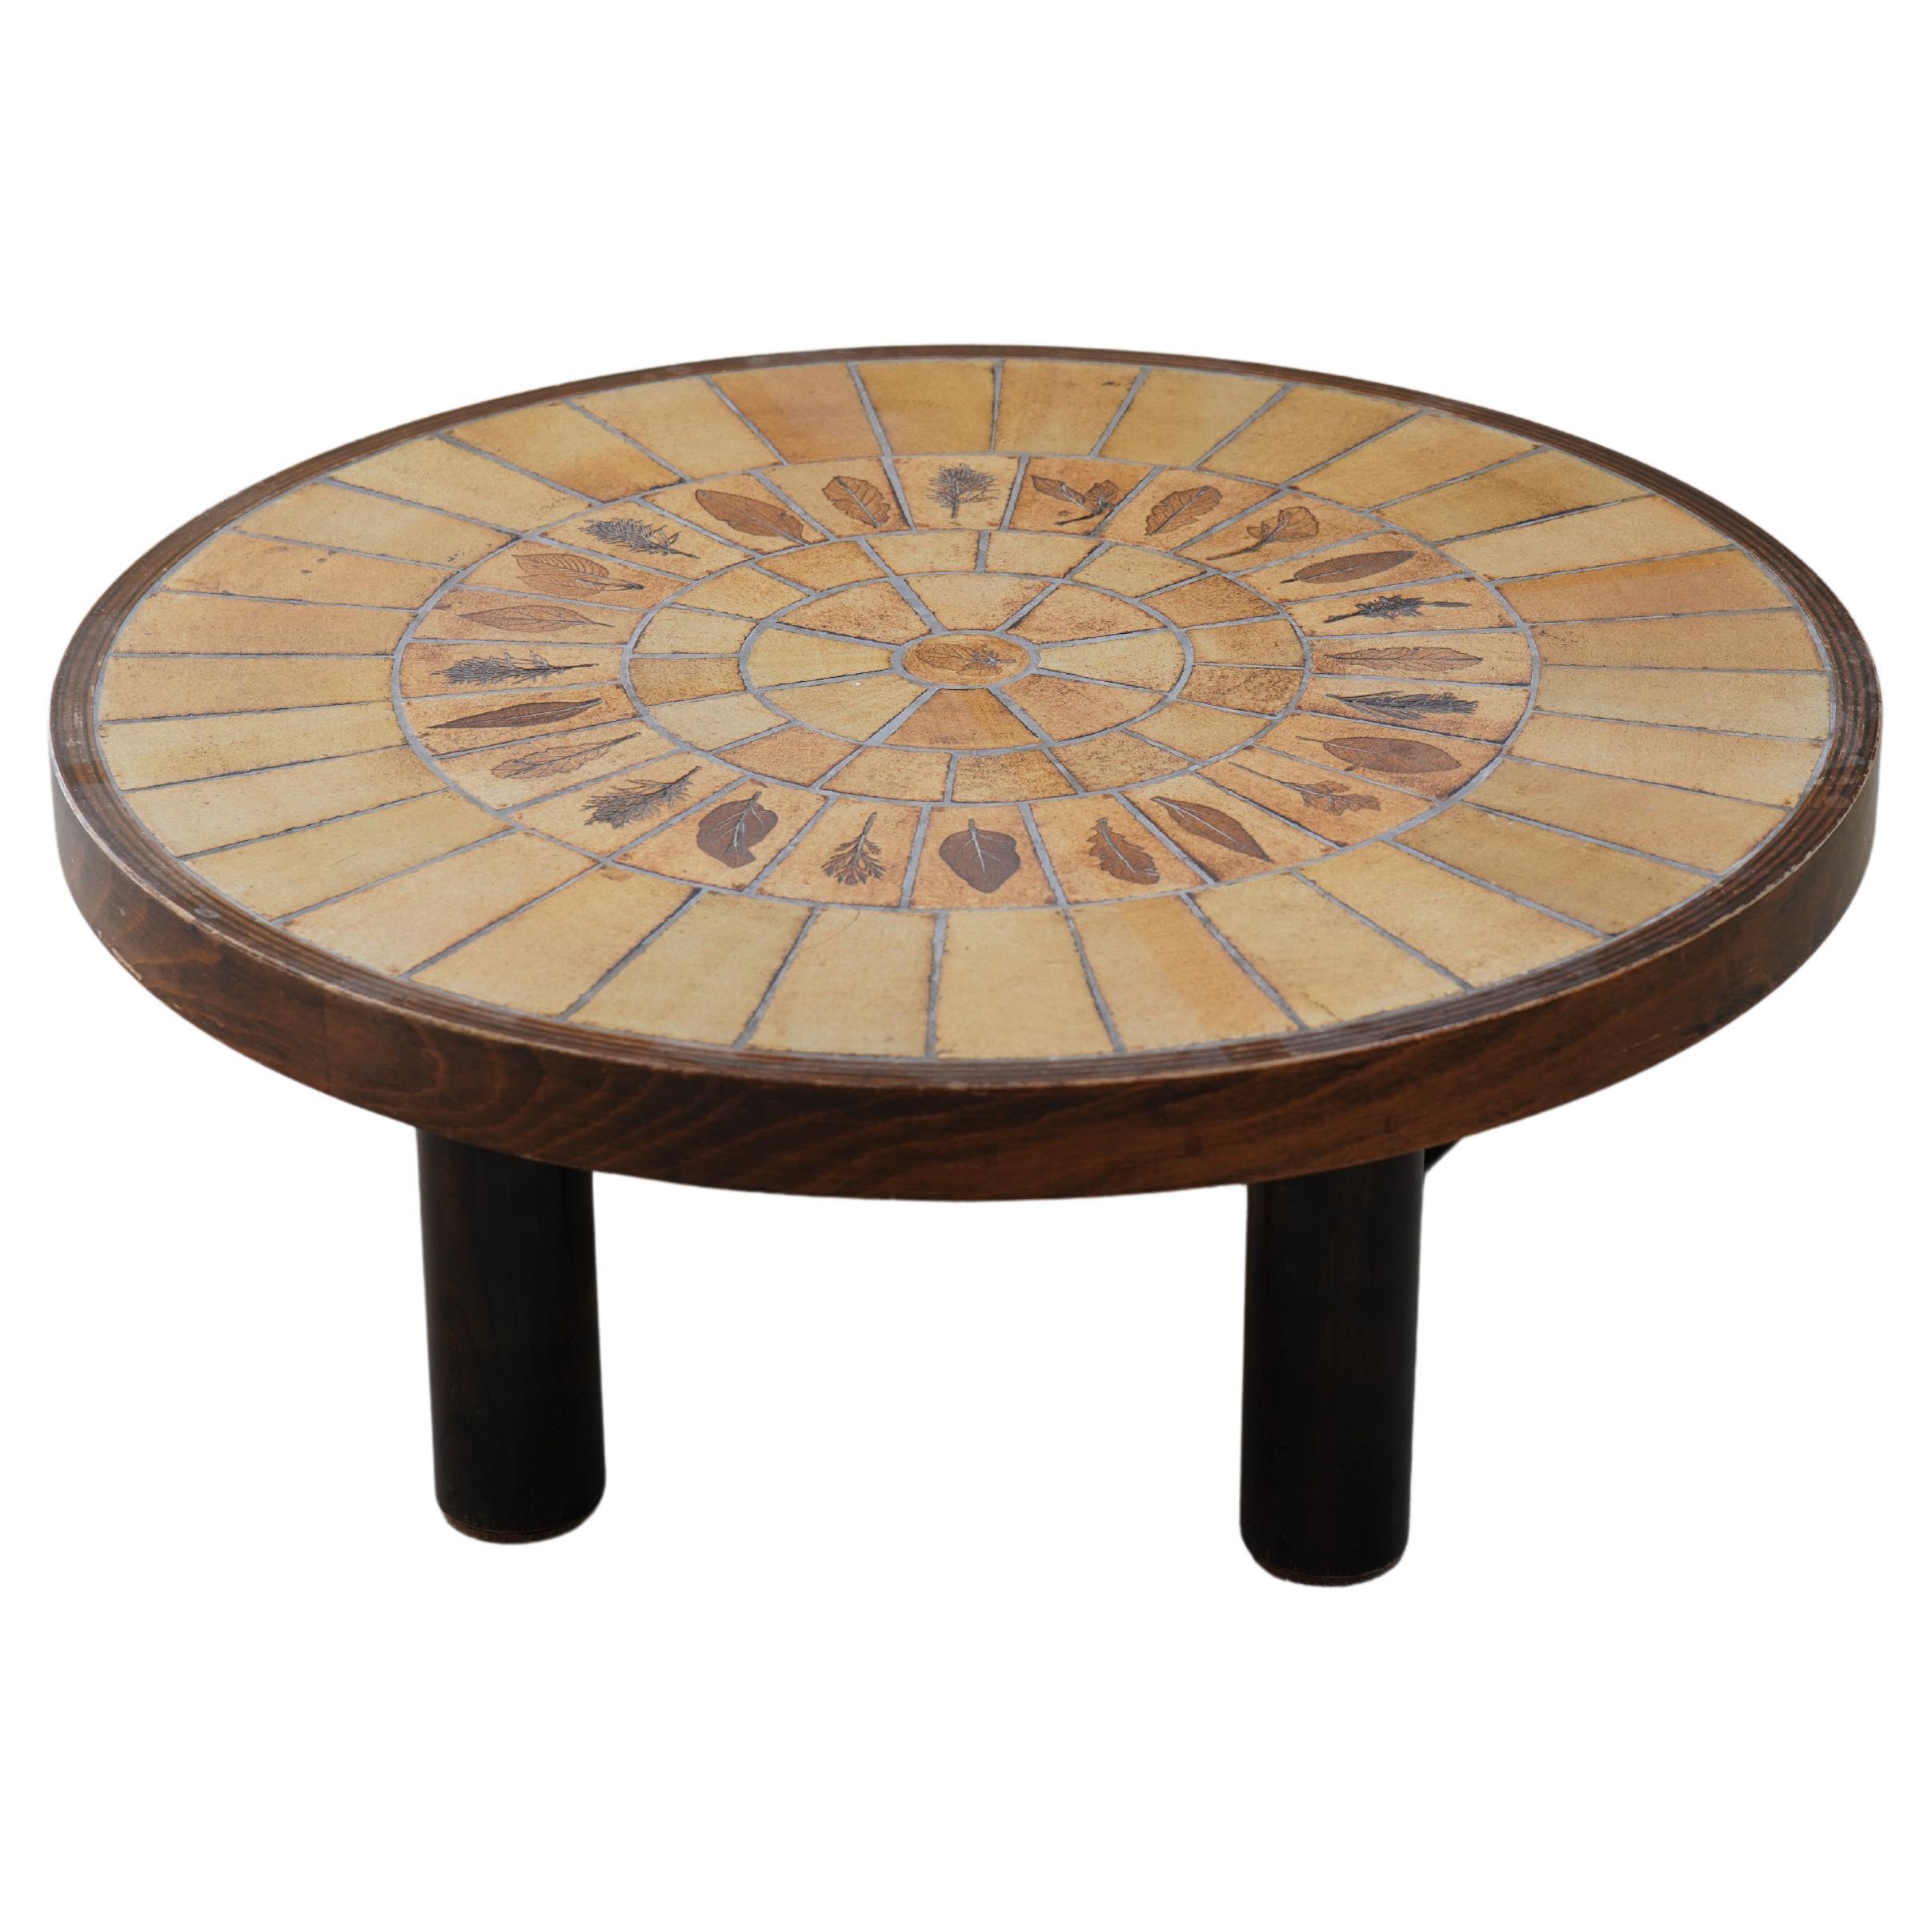 Roger Capron Round Coffee Table with Garrigue Tiles, France 1960s For Sale